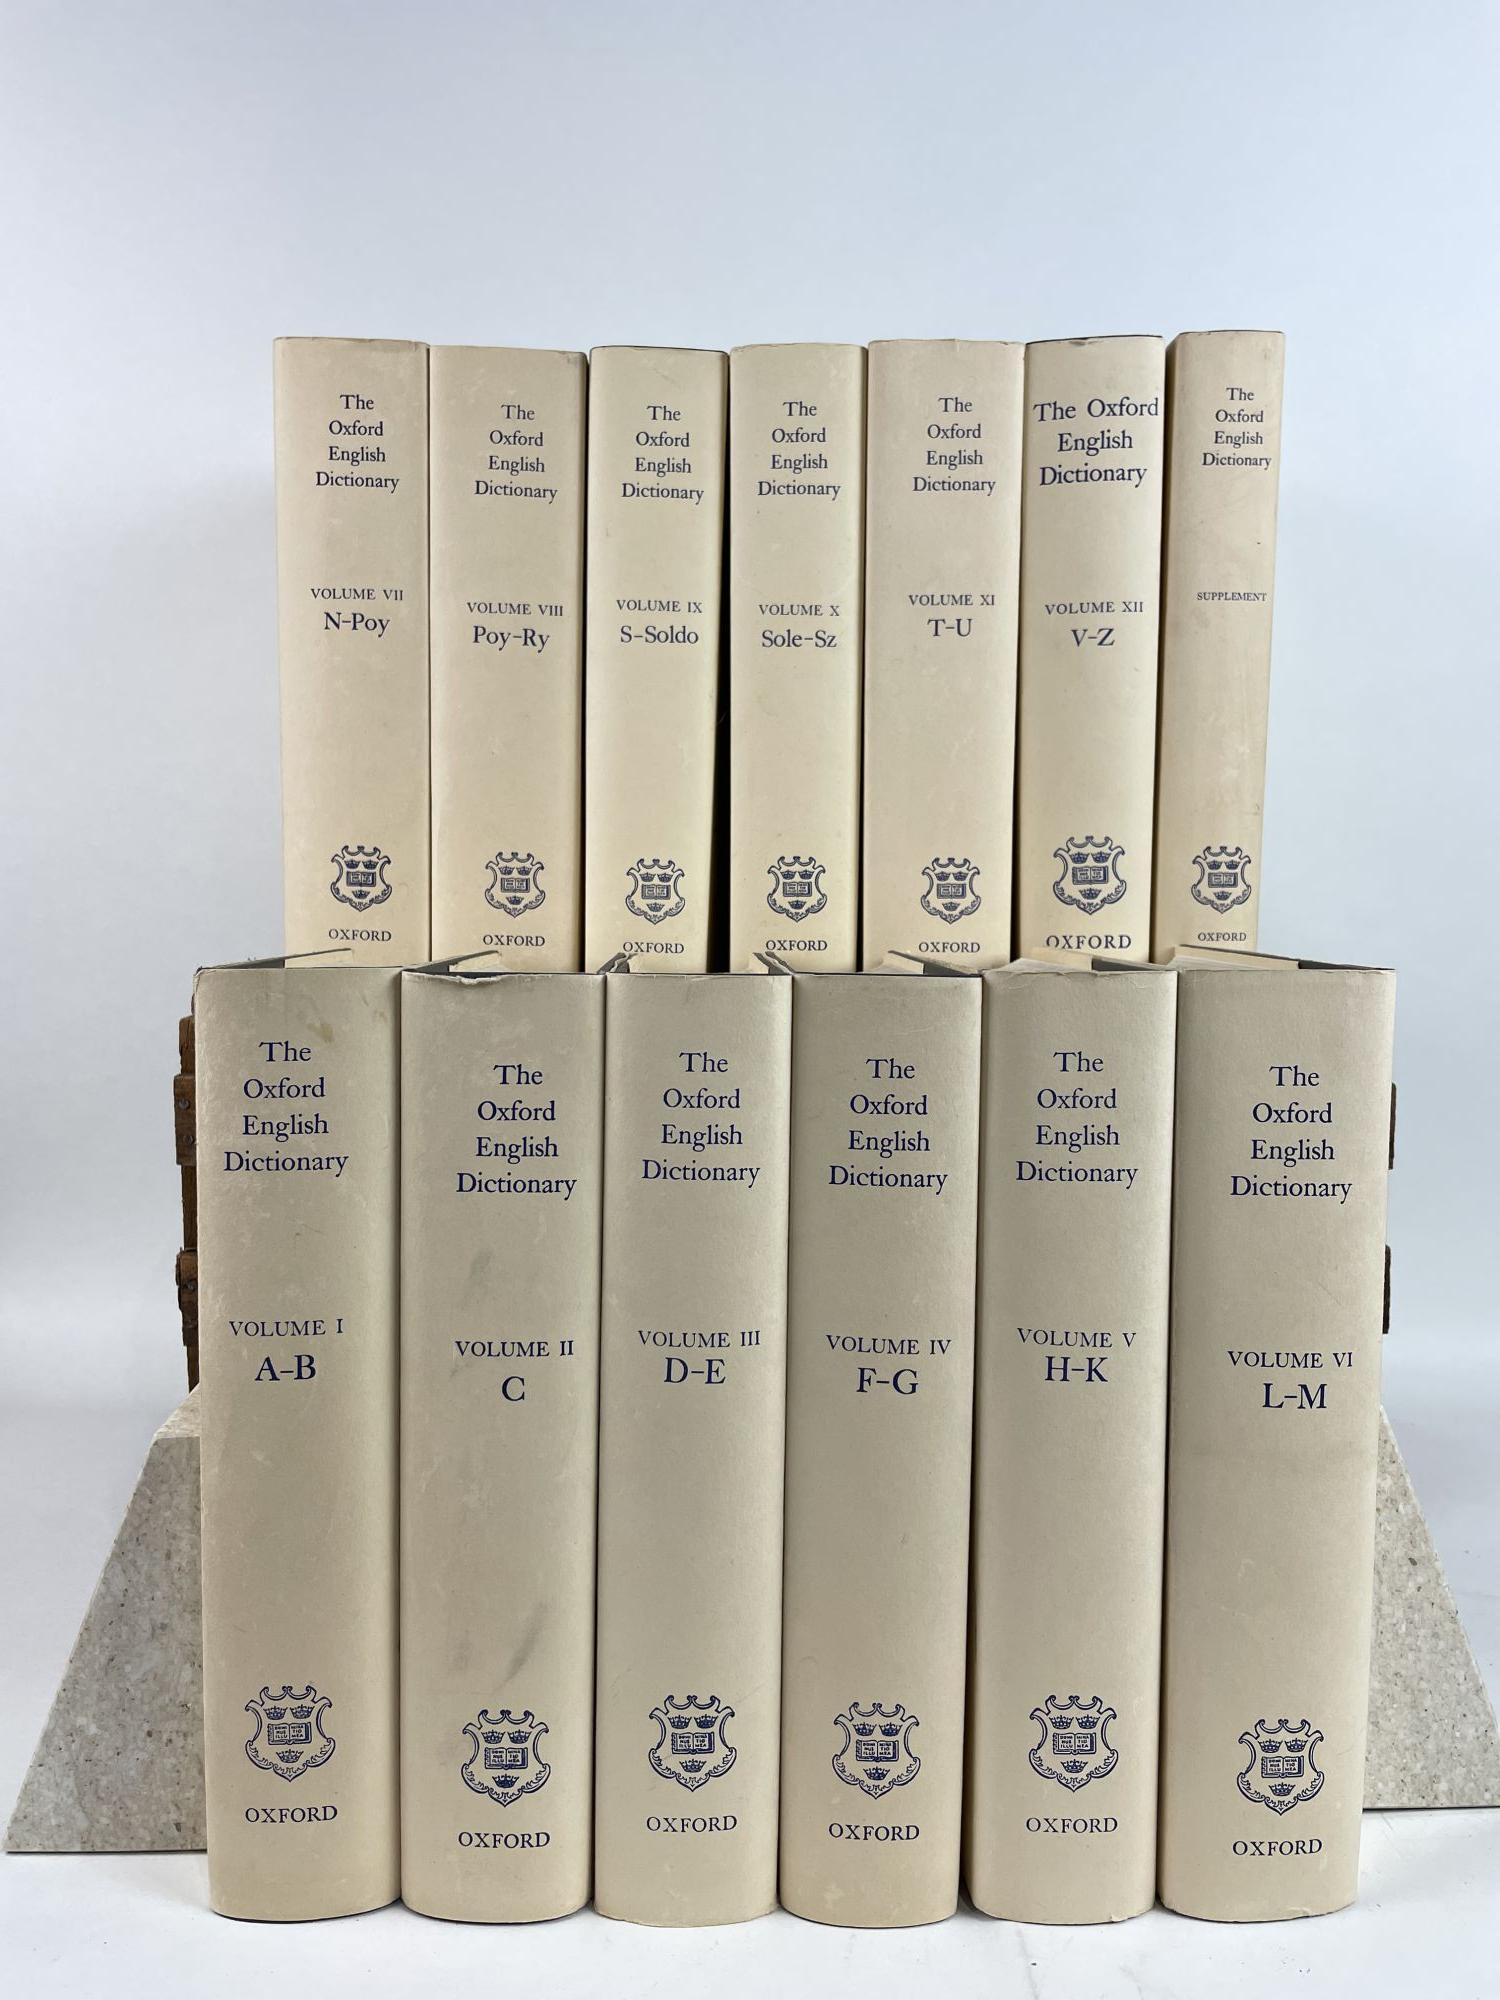 OF　ENGLISH　13　OXFORD　WITH　A.　W.　RE-ISSUE　ON　AN　BEING　A.　ENGLISH　Bradley,　A　SUPPLEMENT,　Murray,　BIBLIOGRAPHY　NEW　H.　CORRECTED　INTRODUCTION,　THE　A　James　Henry　DICTIONARY　DICTIONARY:　PRINCIPLES　Volumes　AND　HISTORICAL